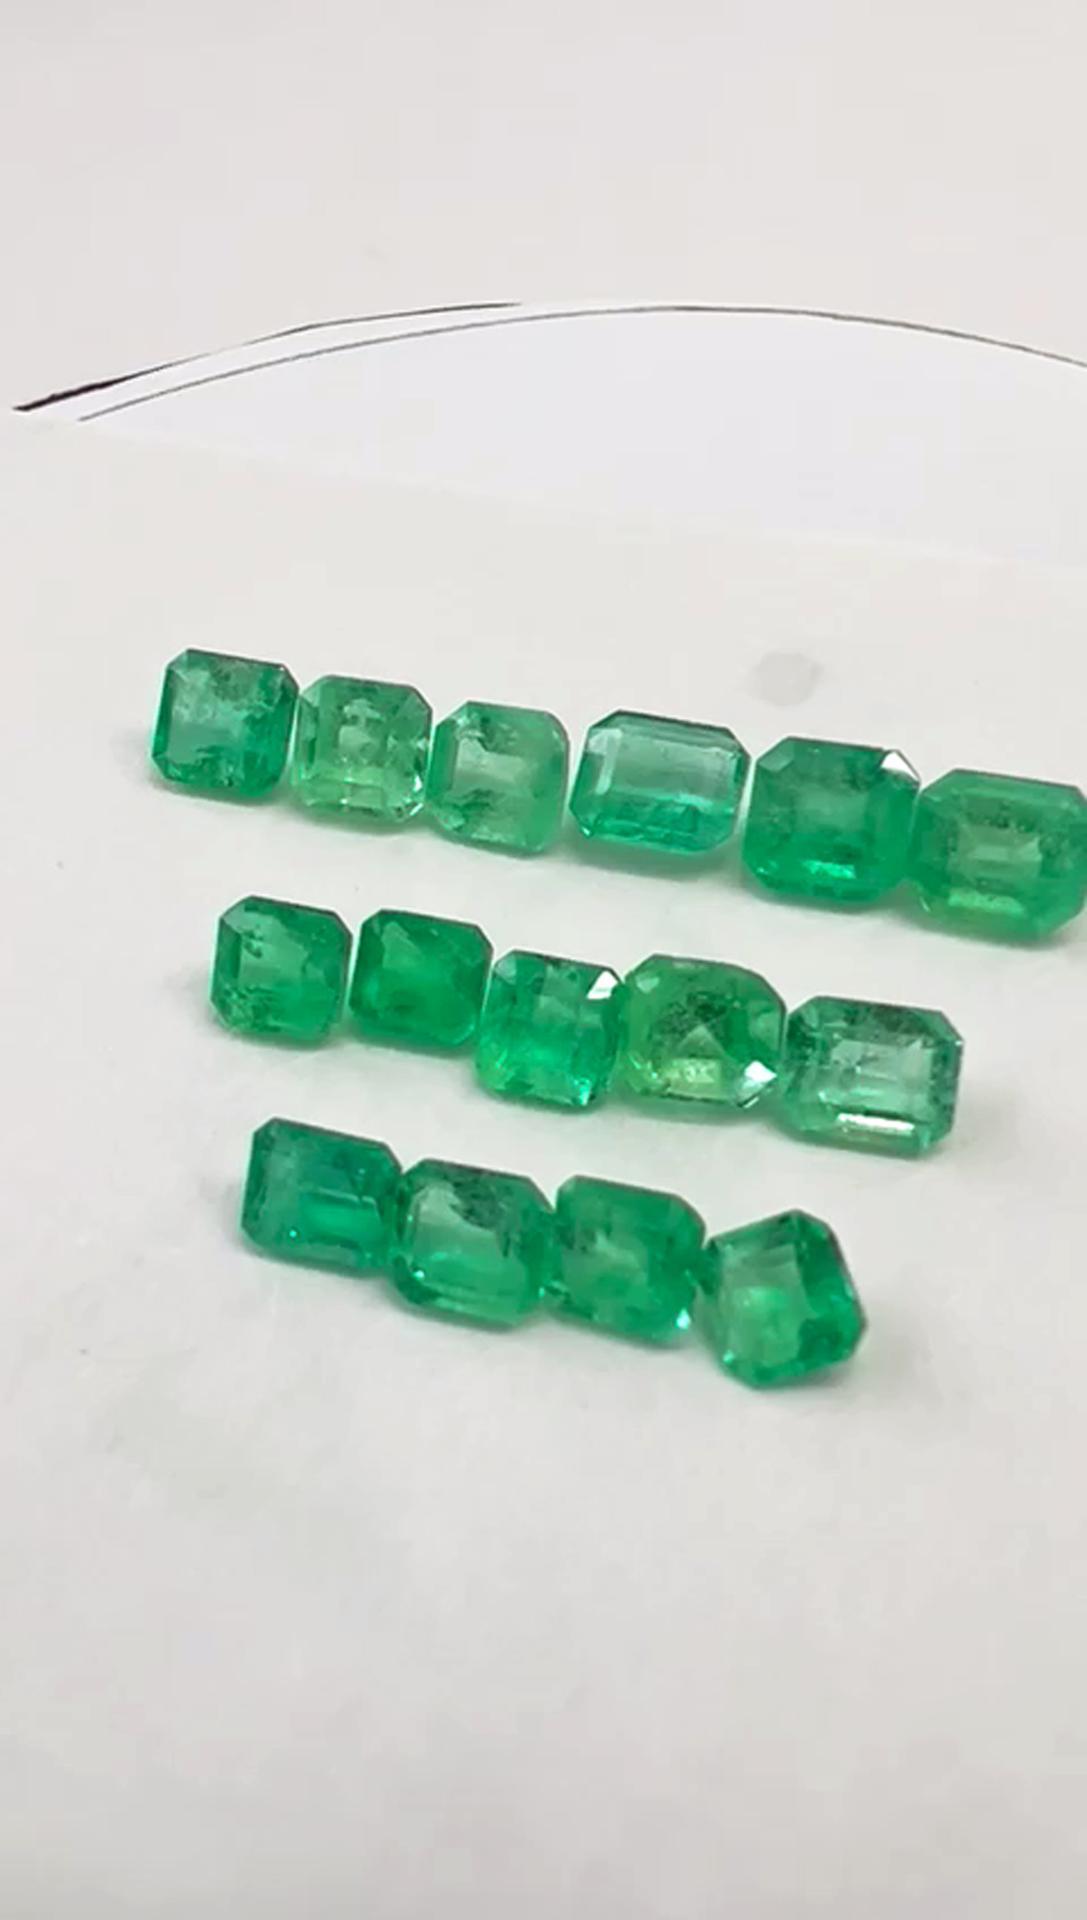 10.34 Ct. Colombian Emerald Lot